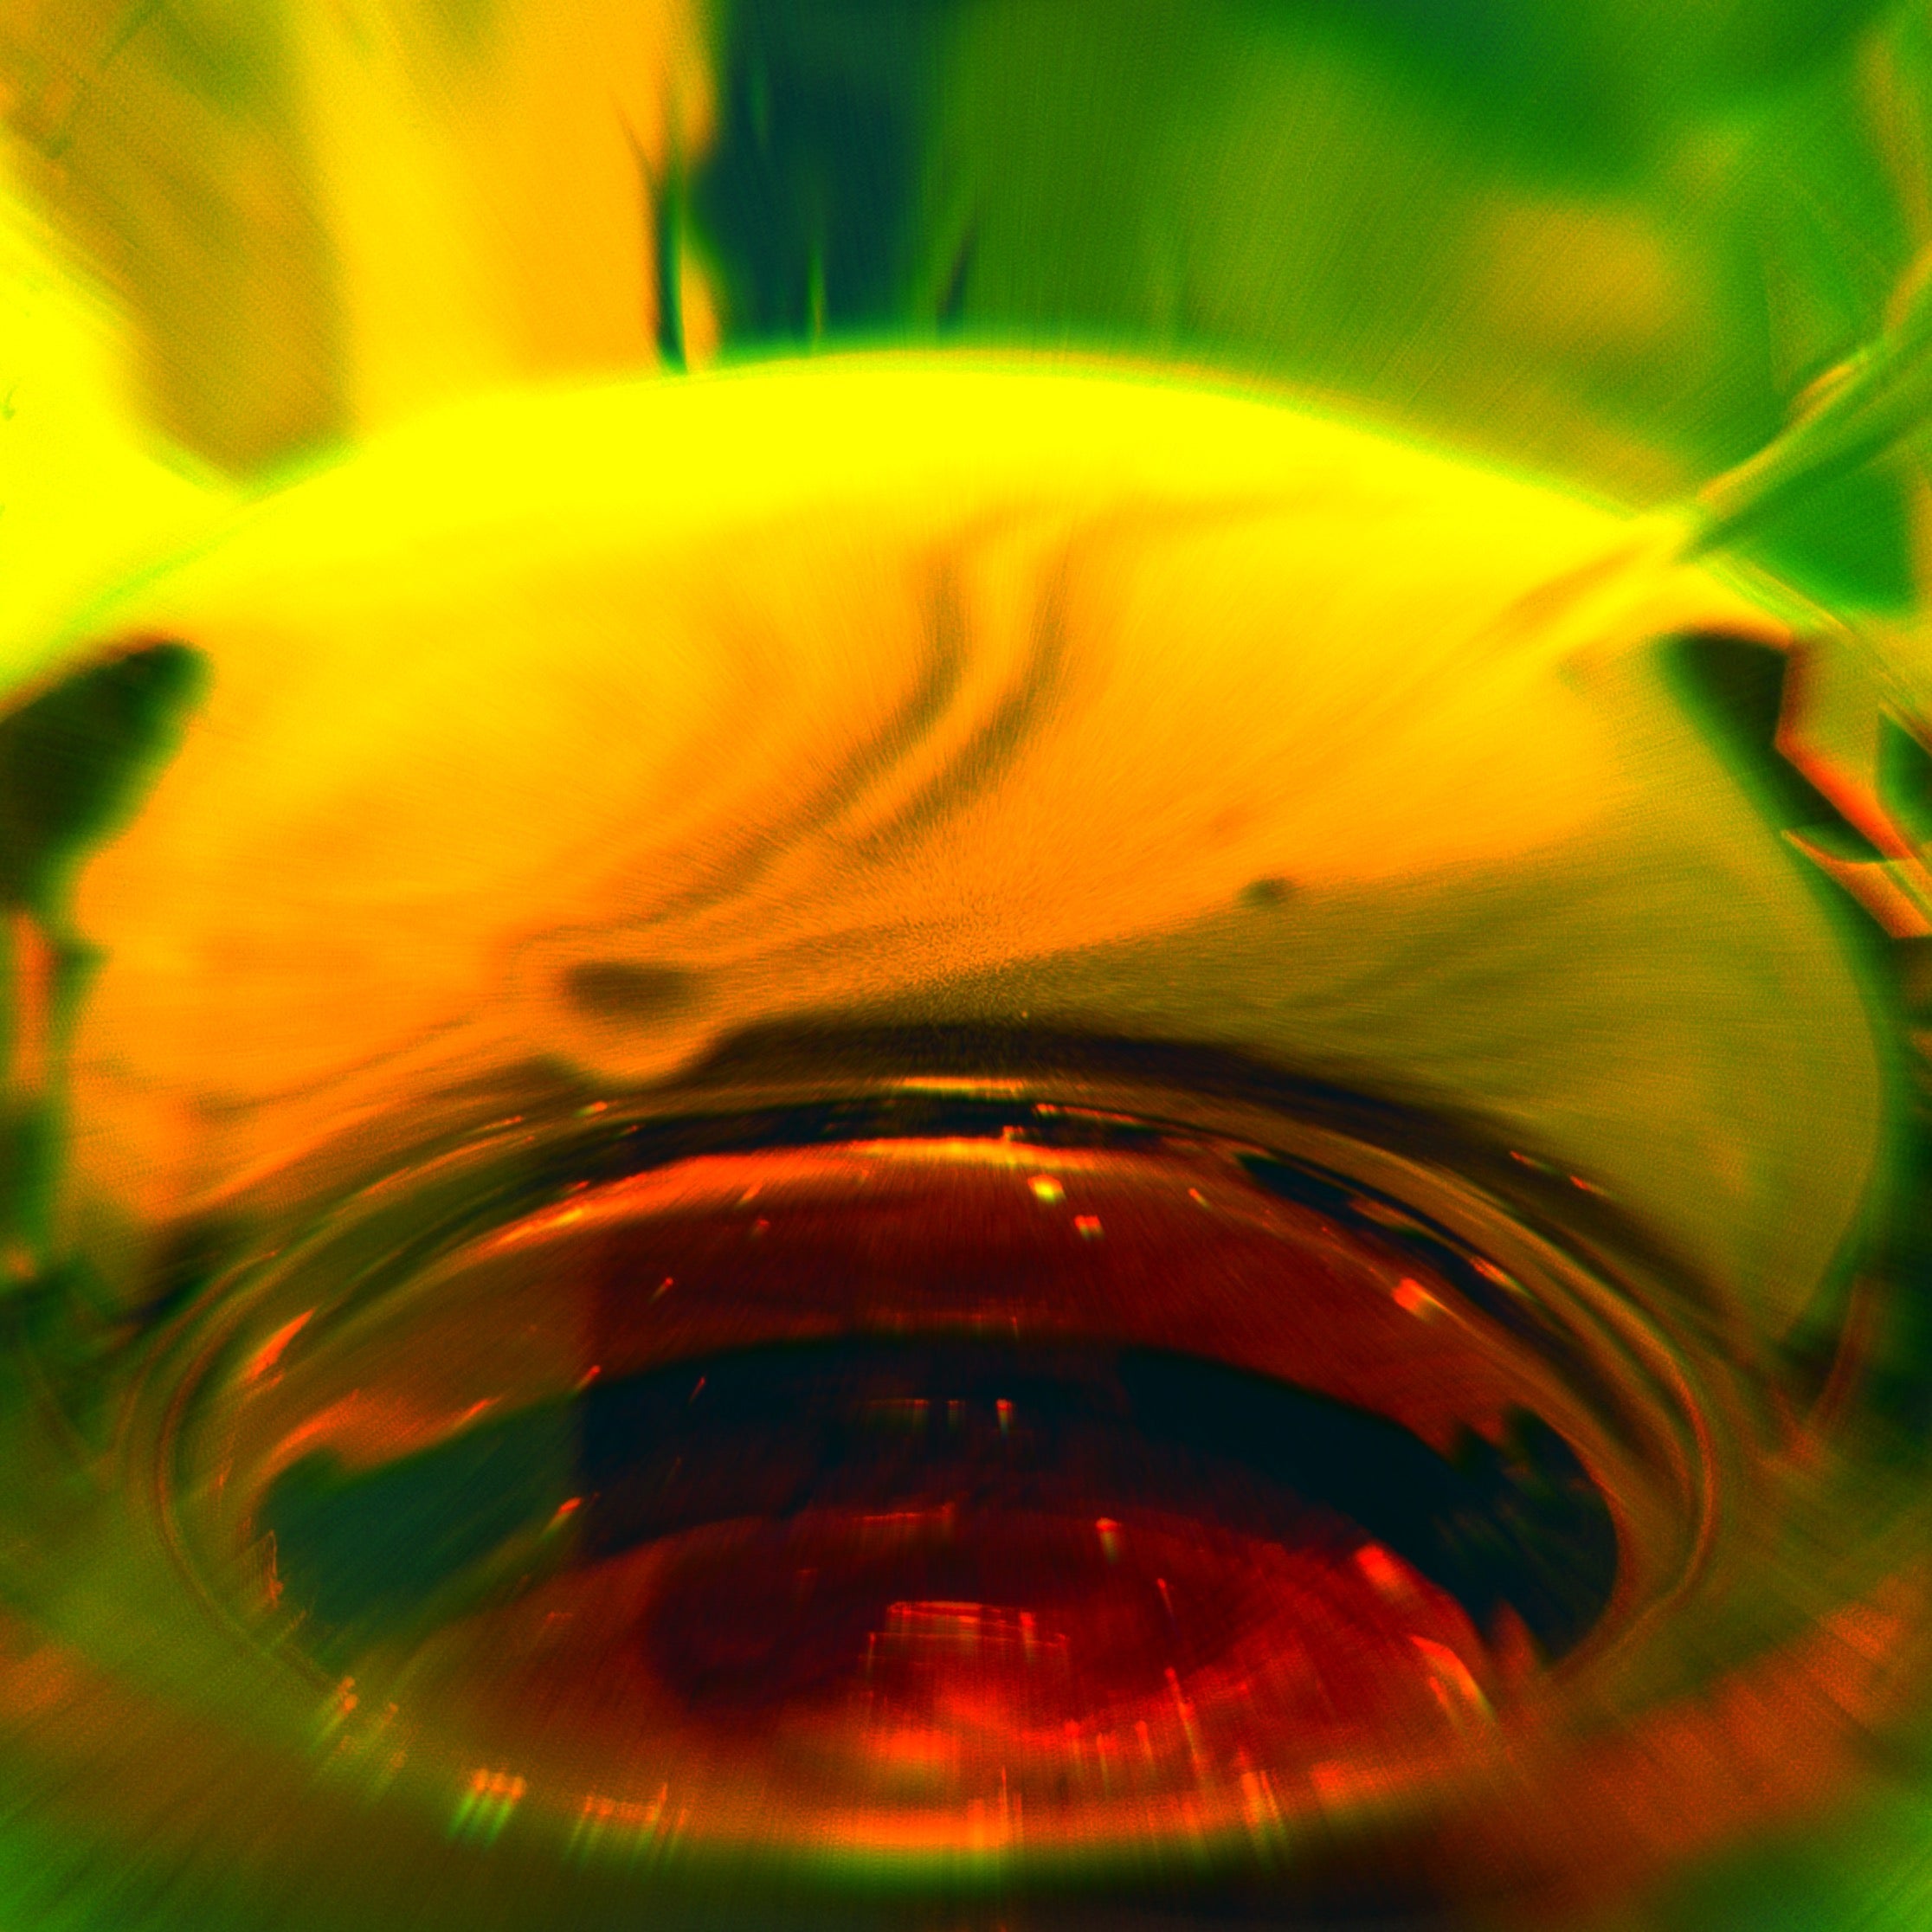 Abstract image of whisky dram in brown, yellow and green tones. Image by Jorum Studio.